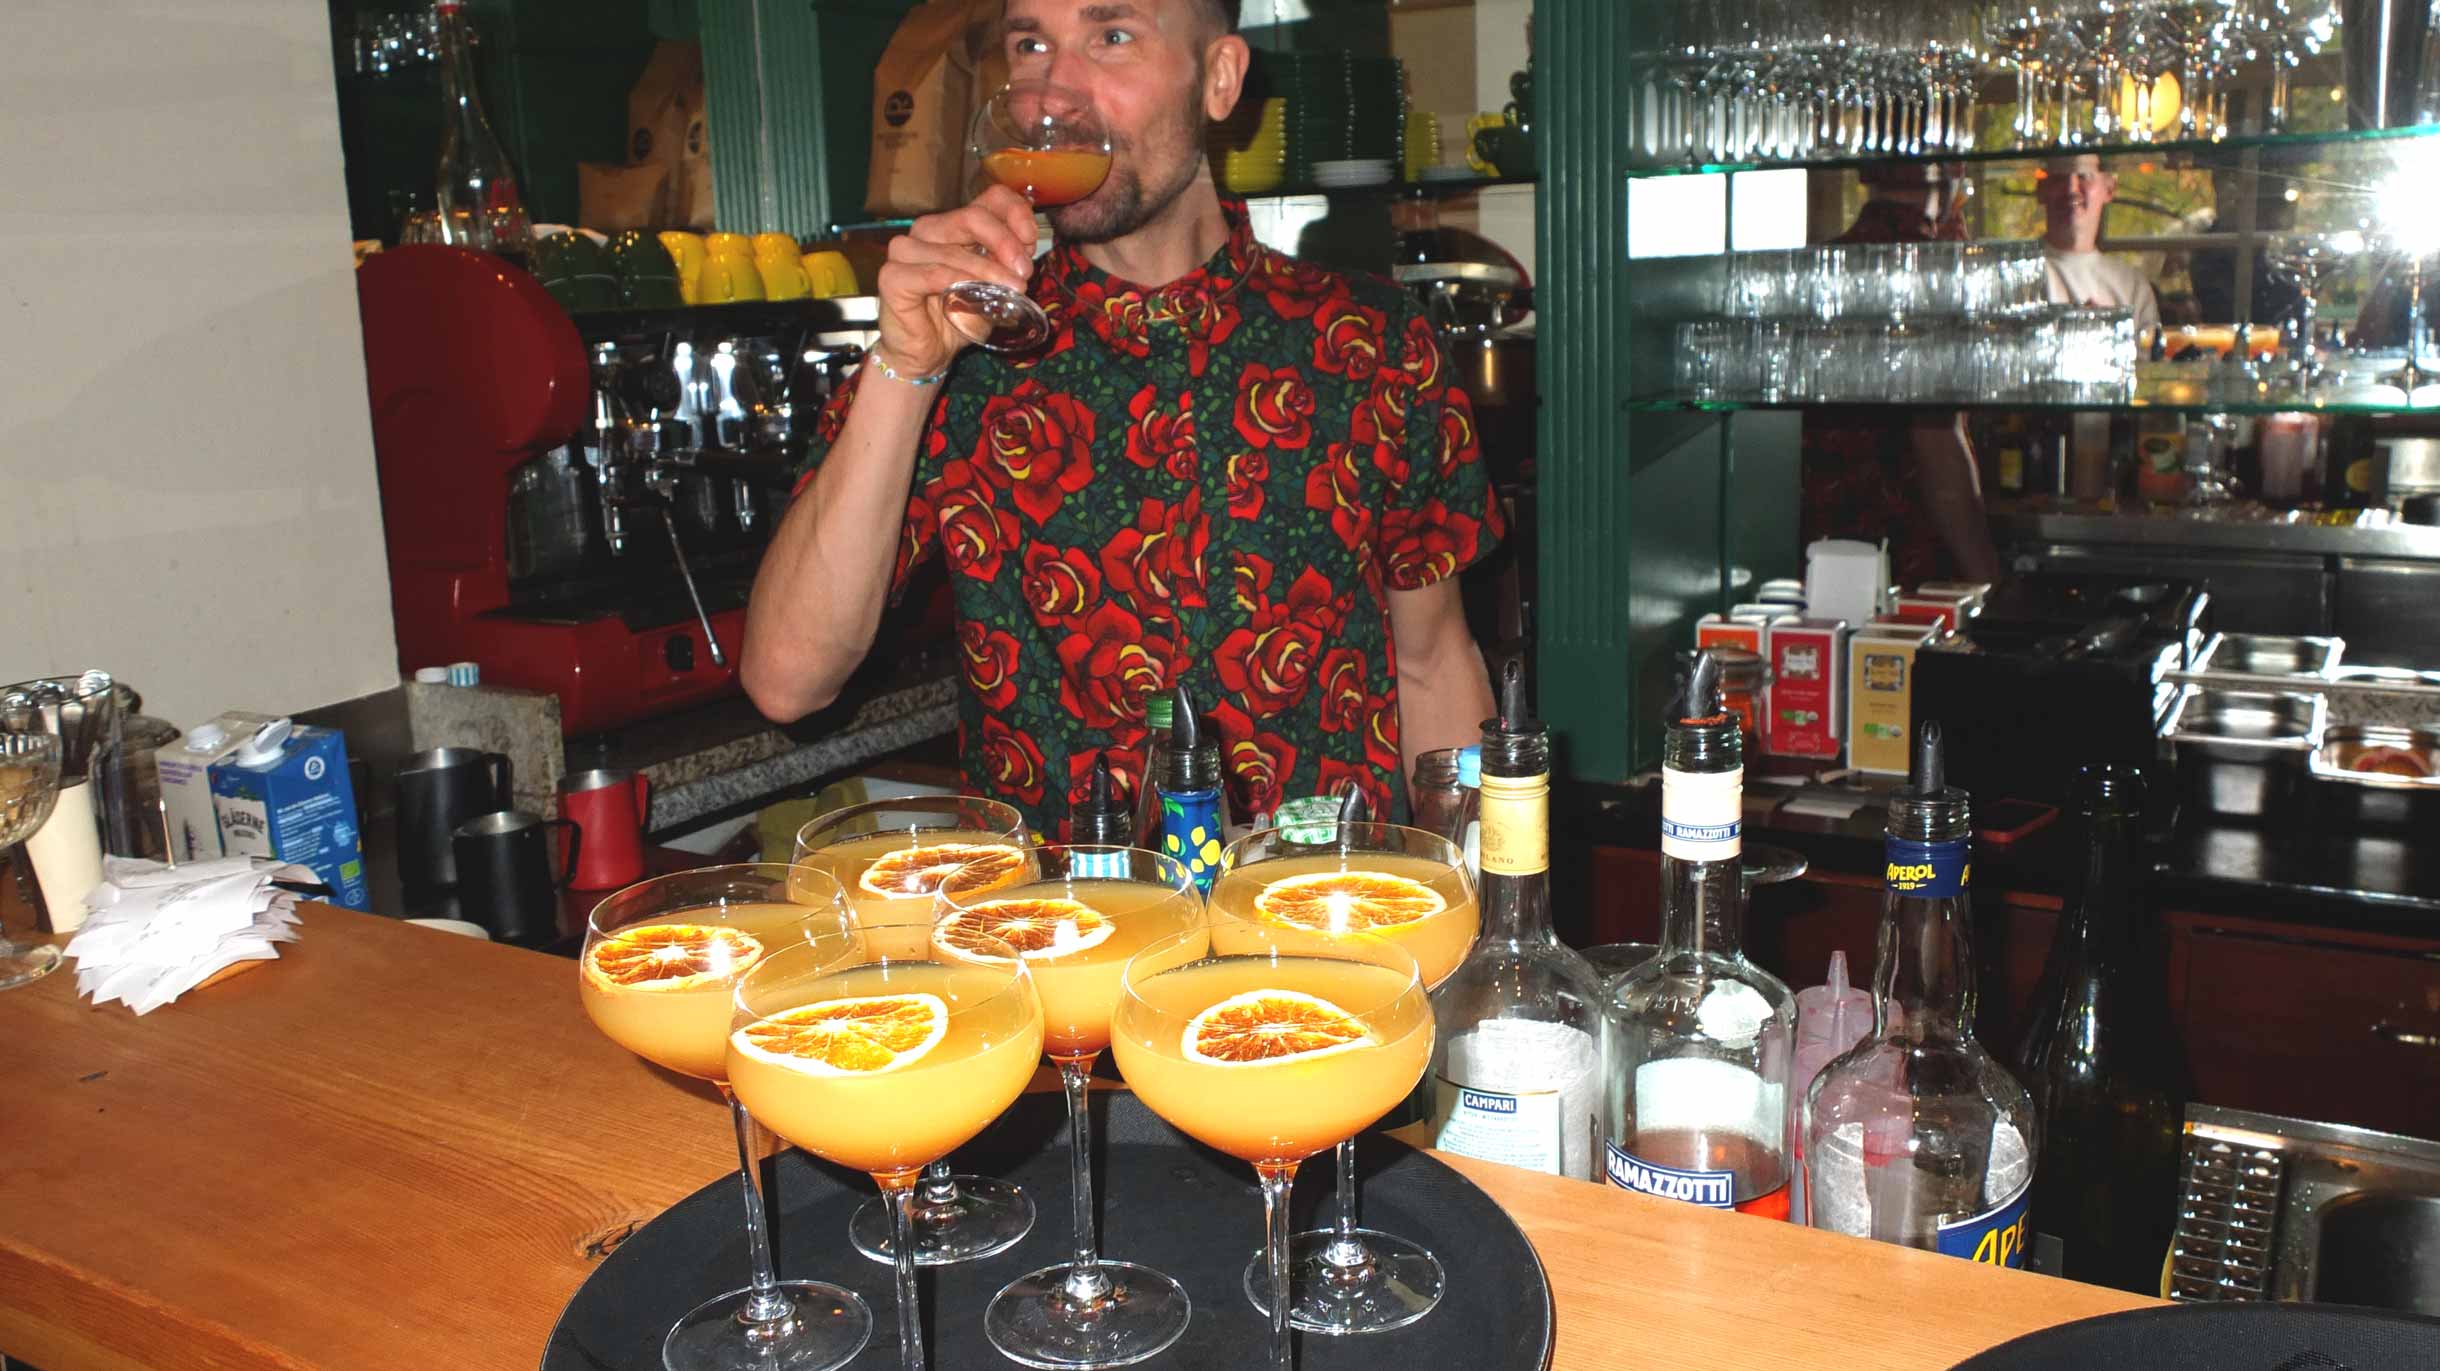 Max mixing Mimosas and testing it, standing behind the bar.